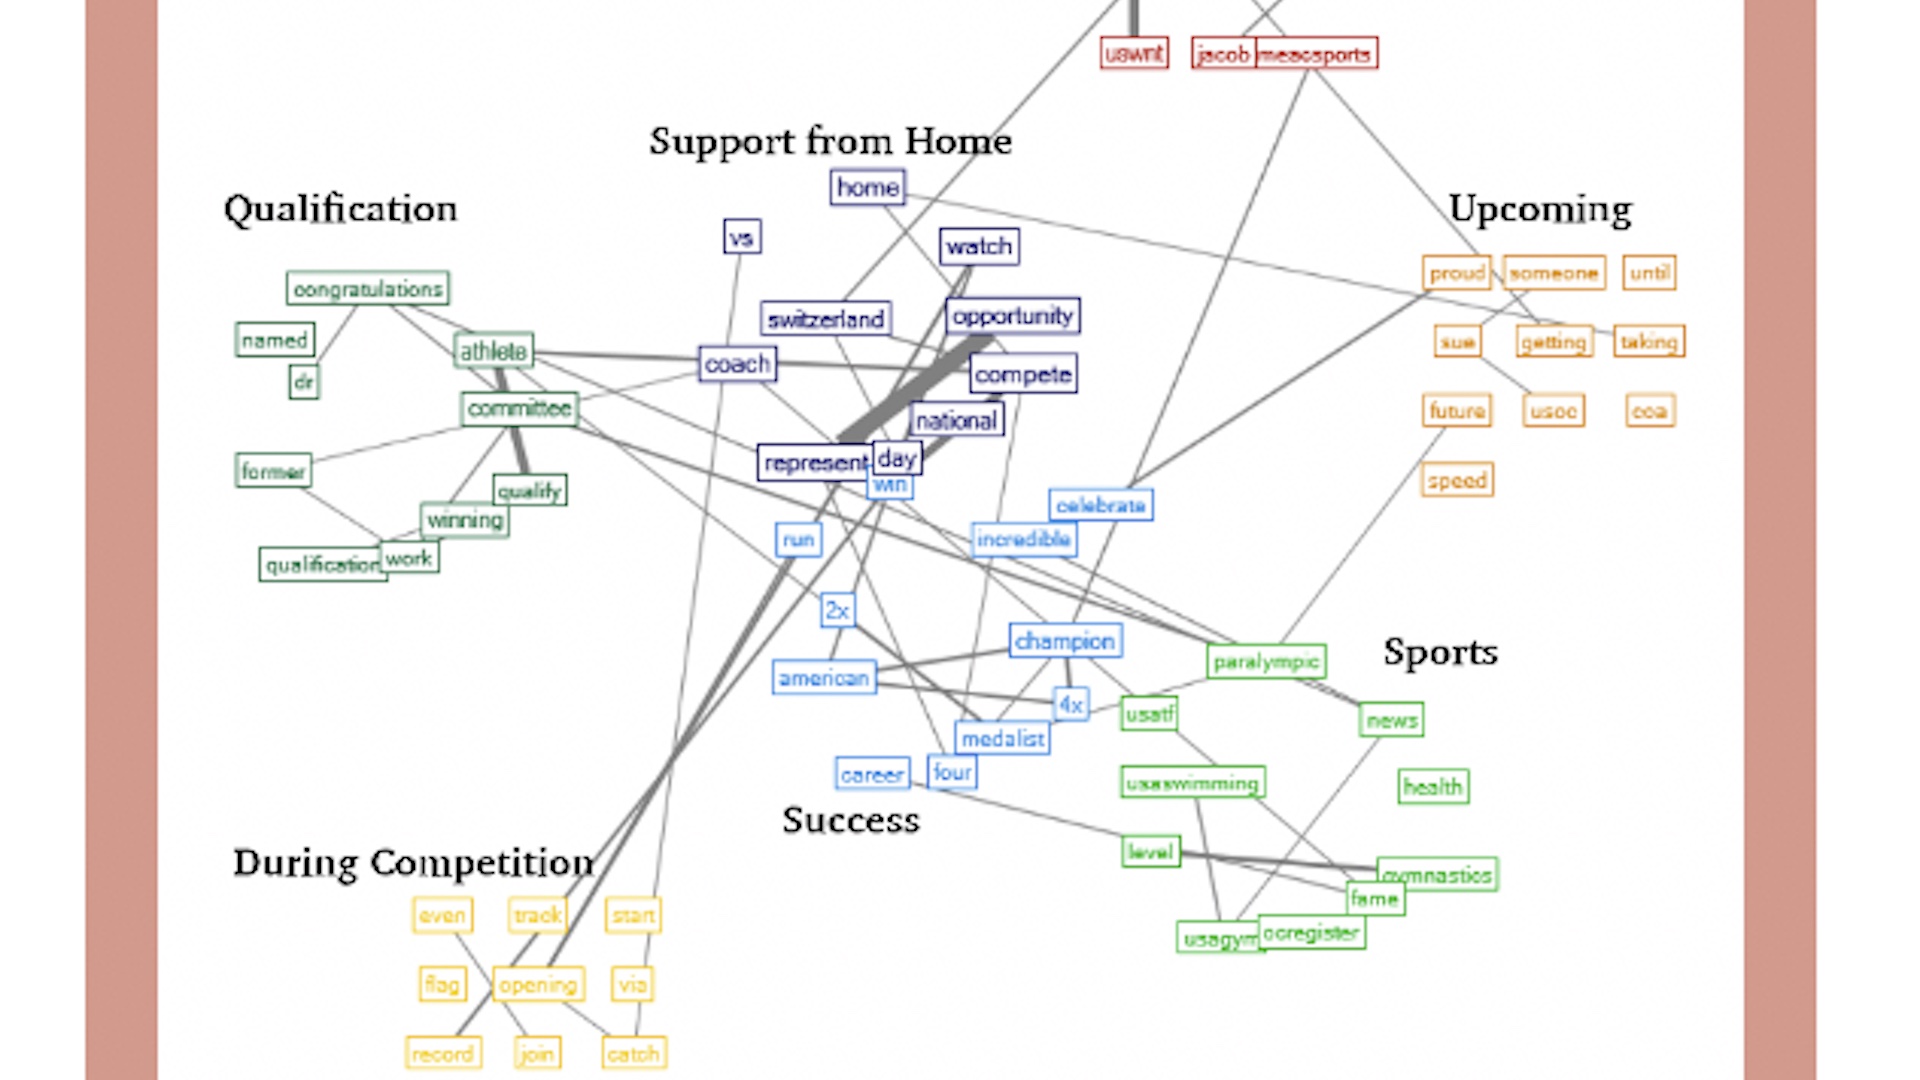 Image that shows US Olympic Semantic Network Analysis.